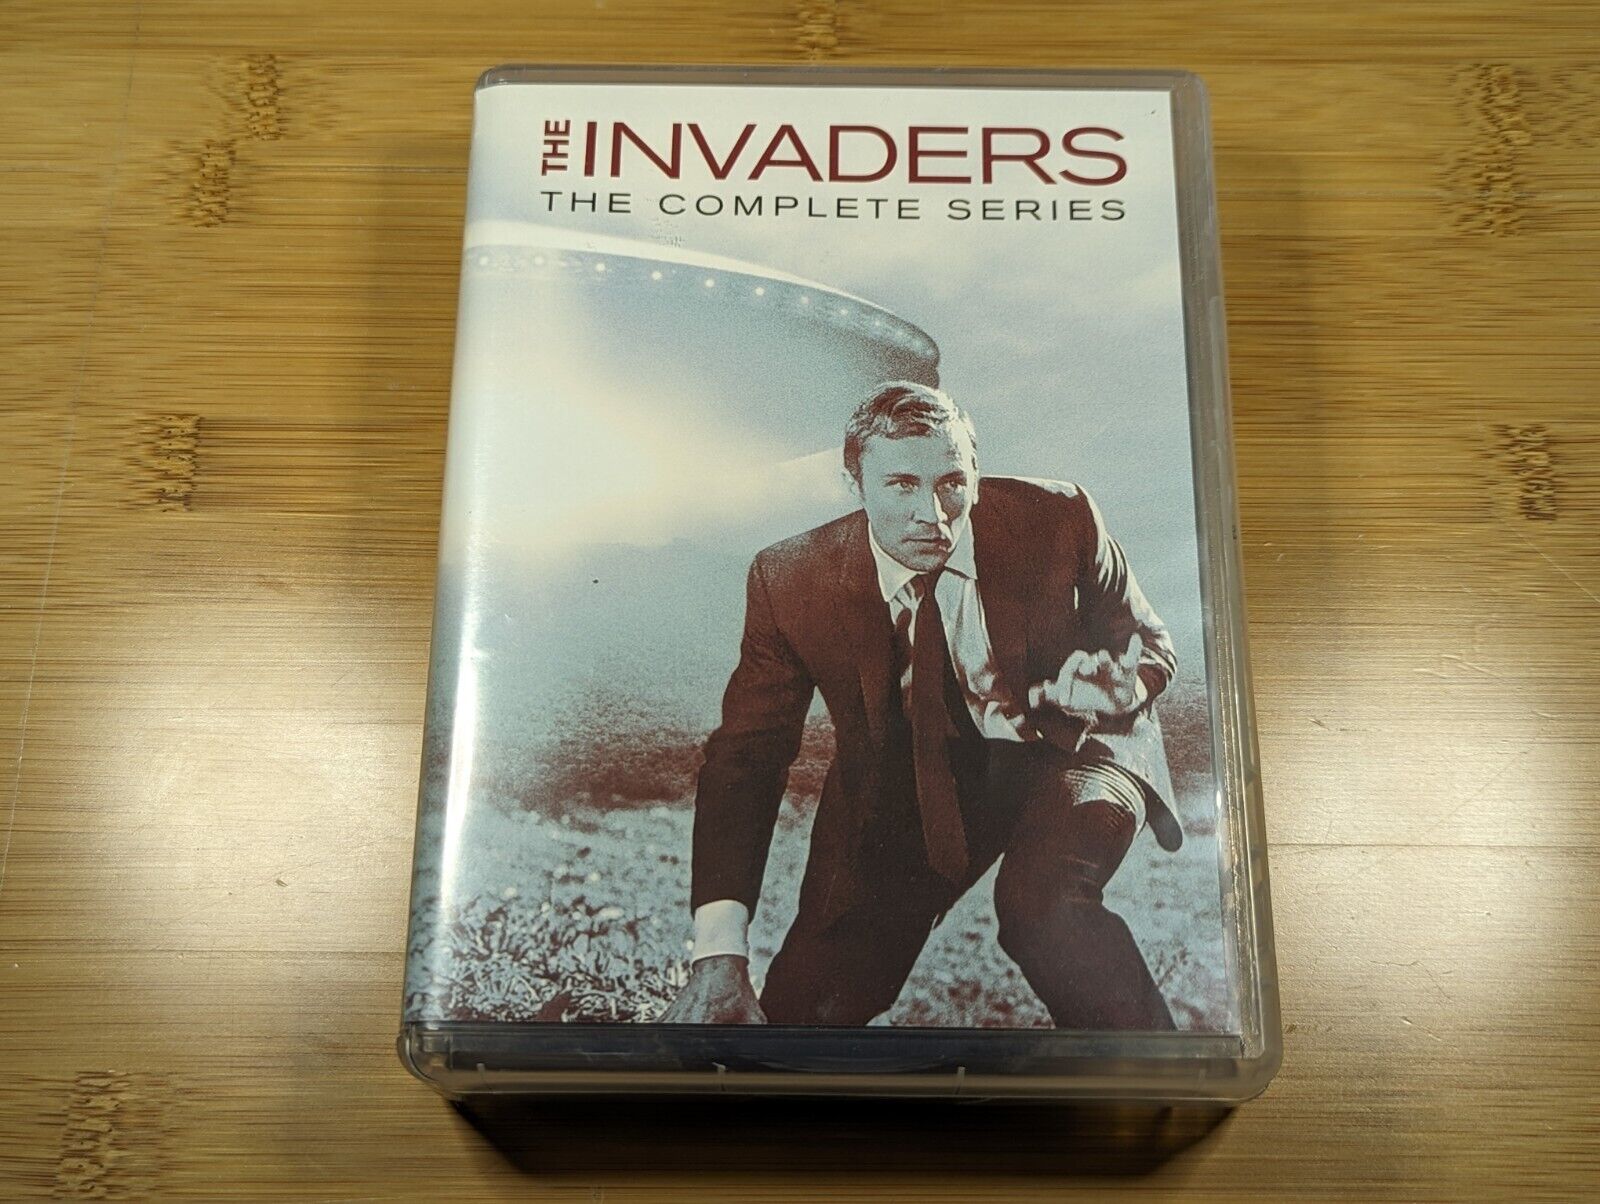 The Invaders - The Complete Series (DVD, 2018) Damaged Case